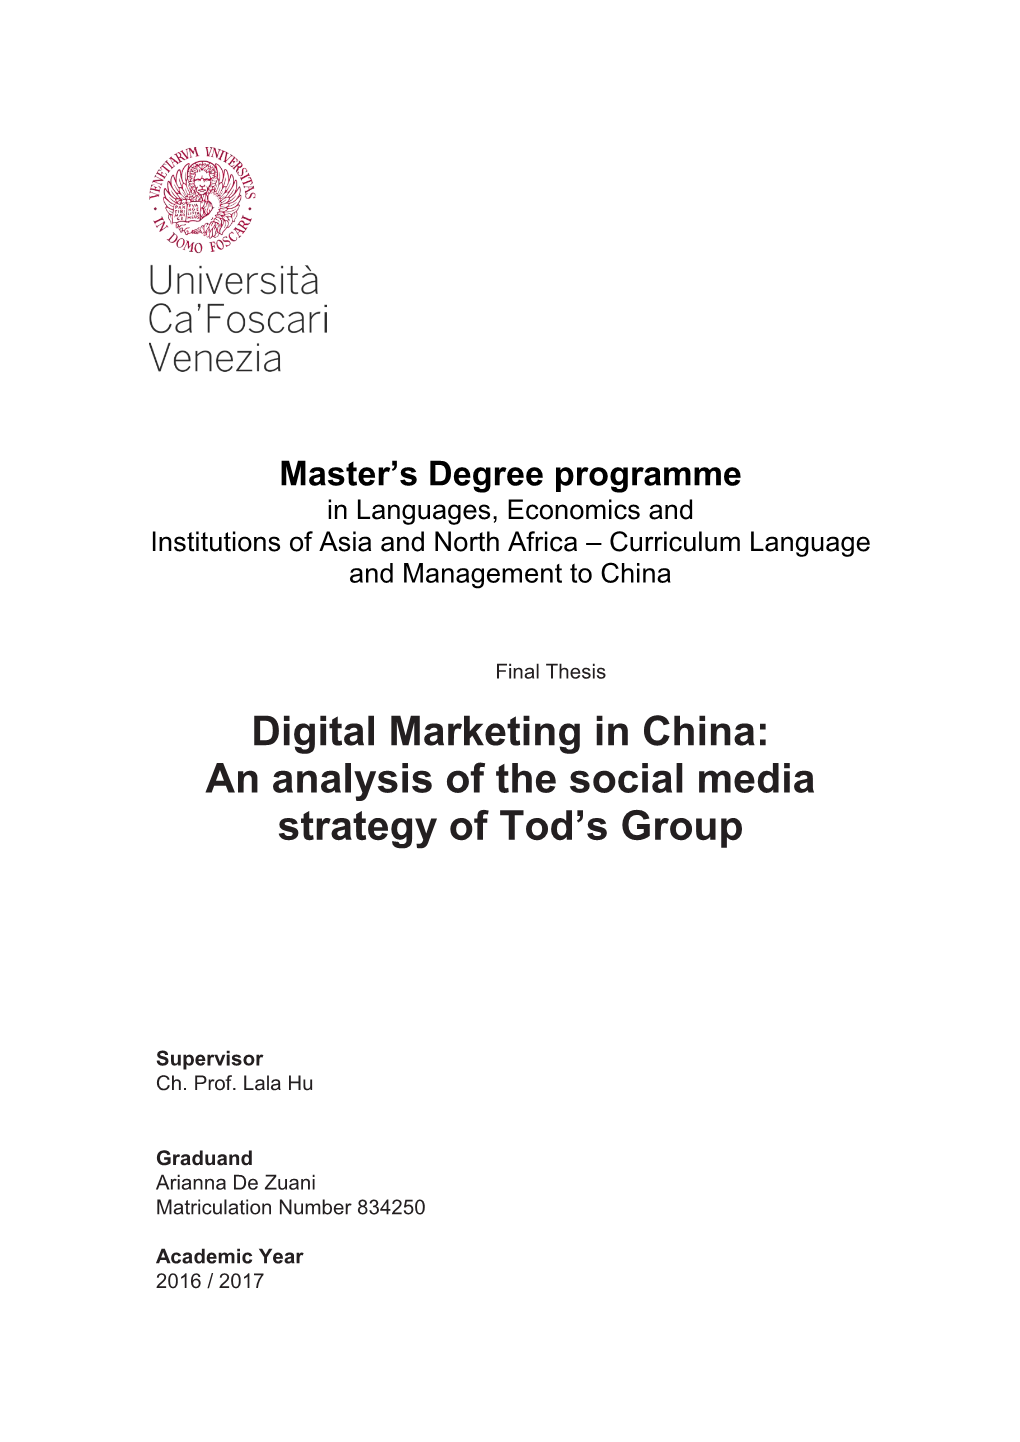 Digital Marketing in China: an Analysis of the Social Media Strategy of Tod’S Group